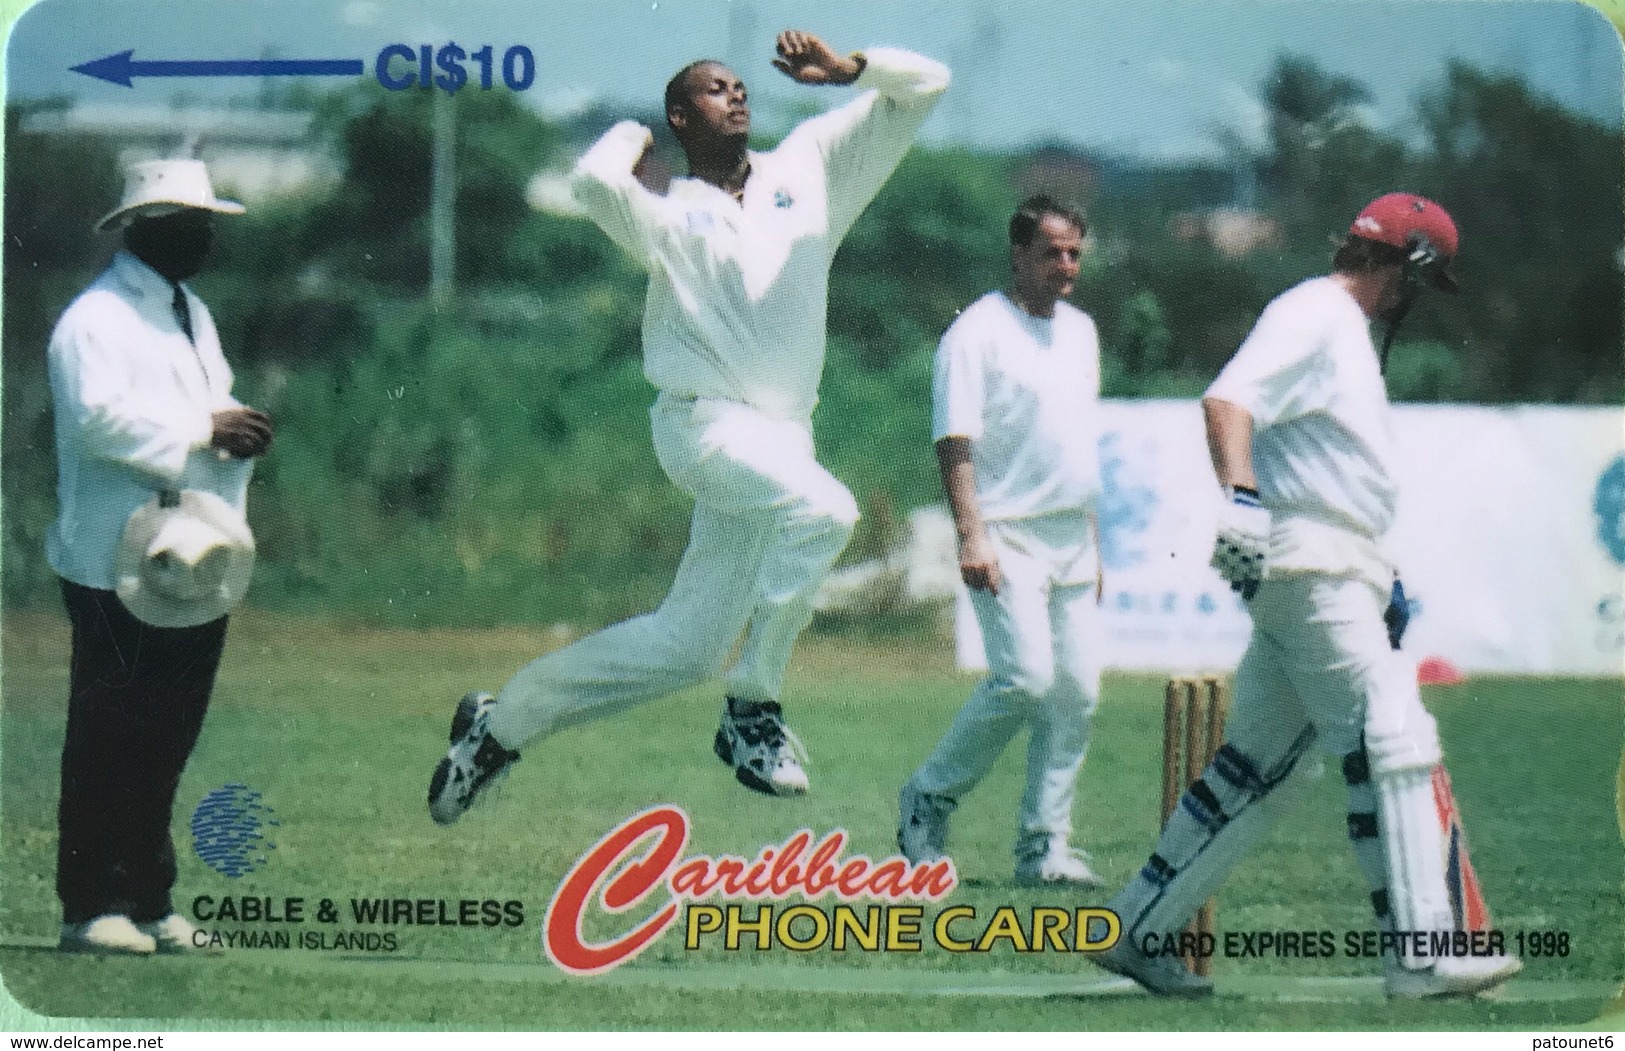 ILES CAYMAN  -  Phonecard  -  Cabble & Wirelees  - West Indies Captain Courtney Walsh  -  CI $ 10 - Kaimaninseln (Cayman I.)